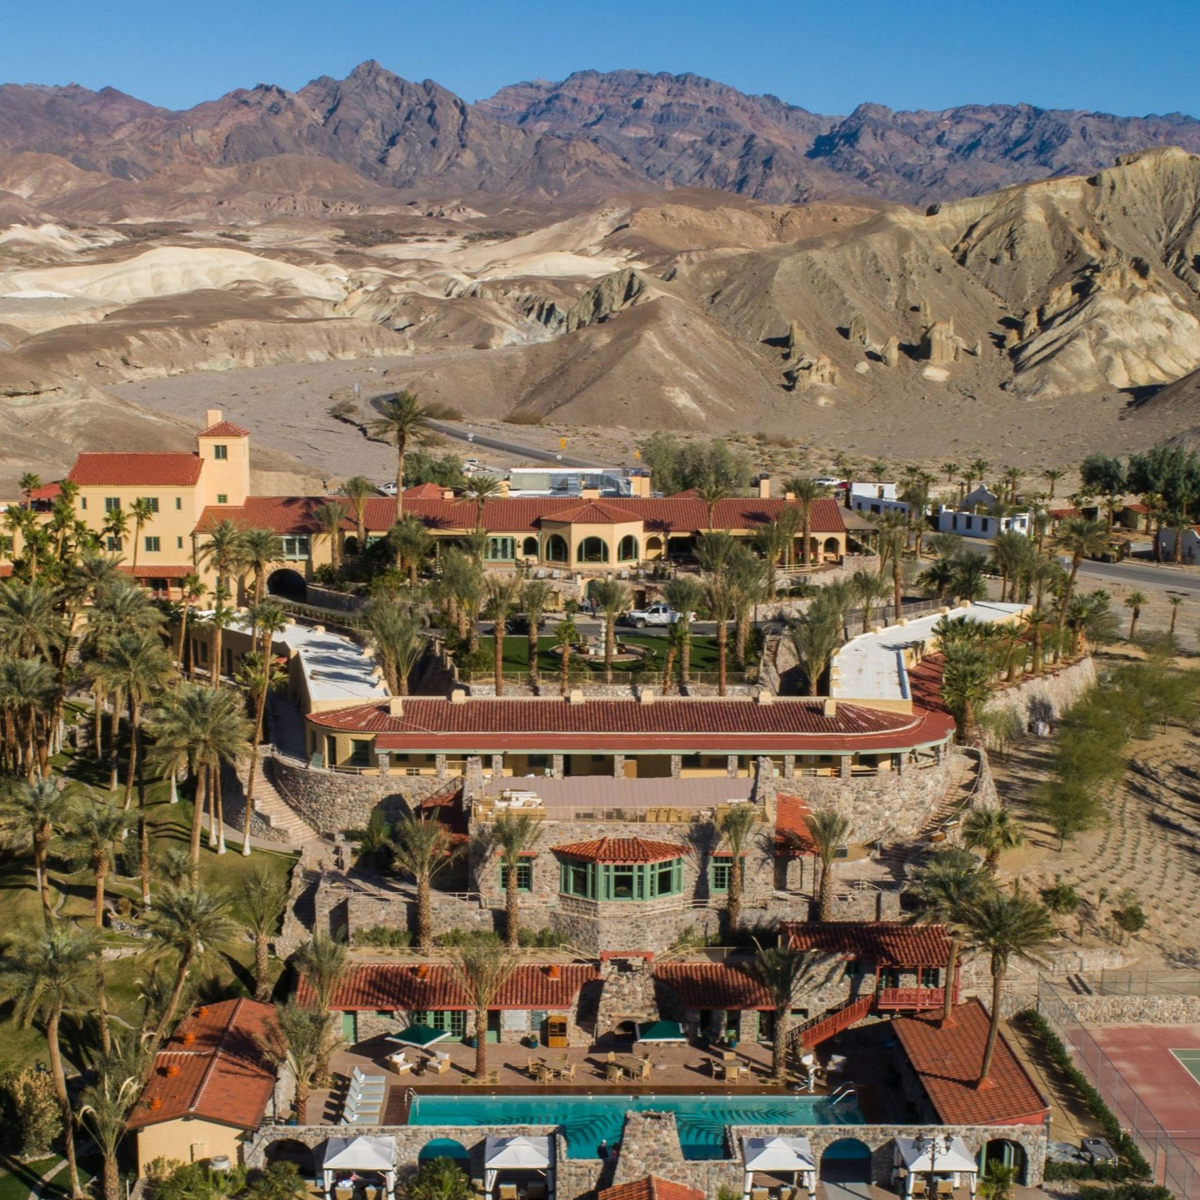 Credit: Historic Hotels of America and The Inn at Death Valley 